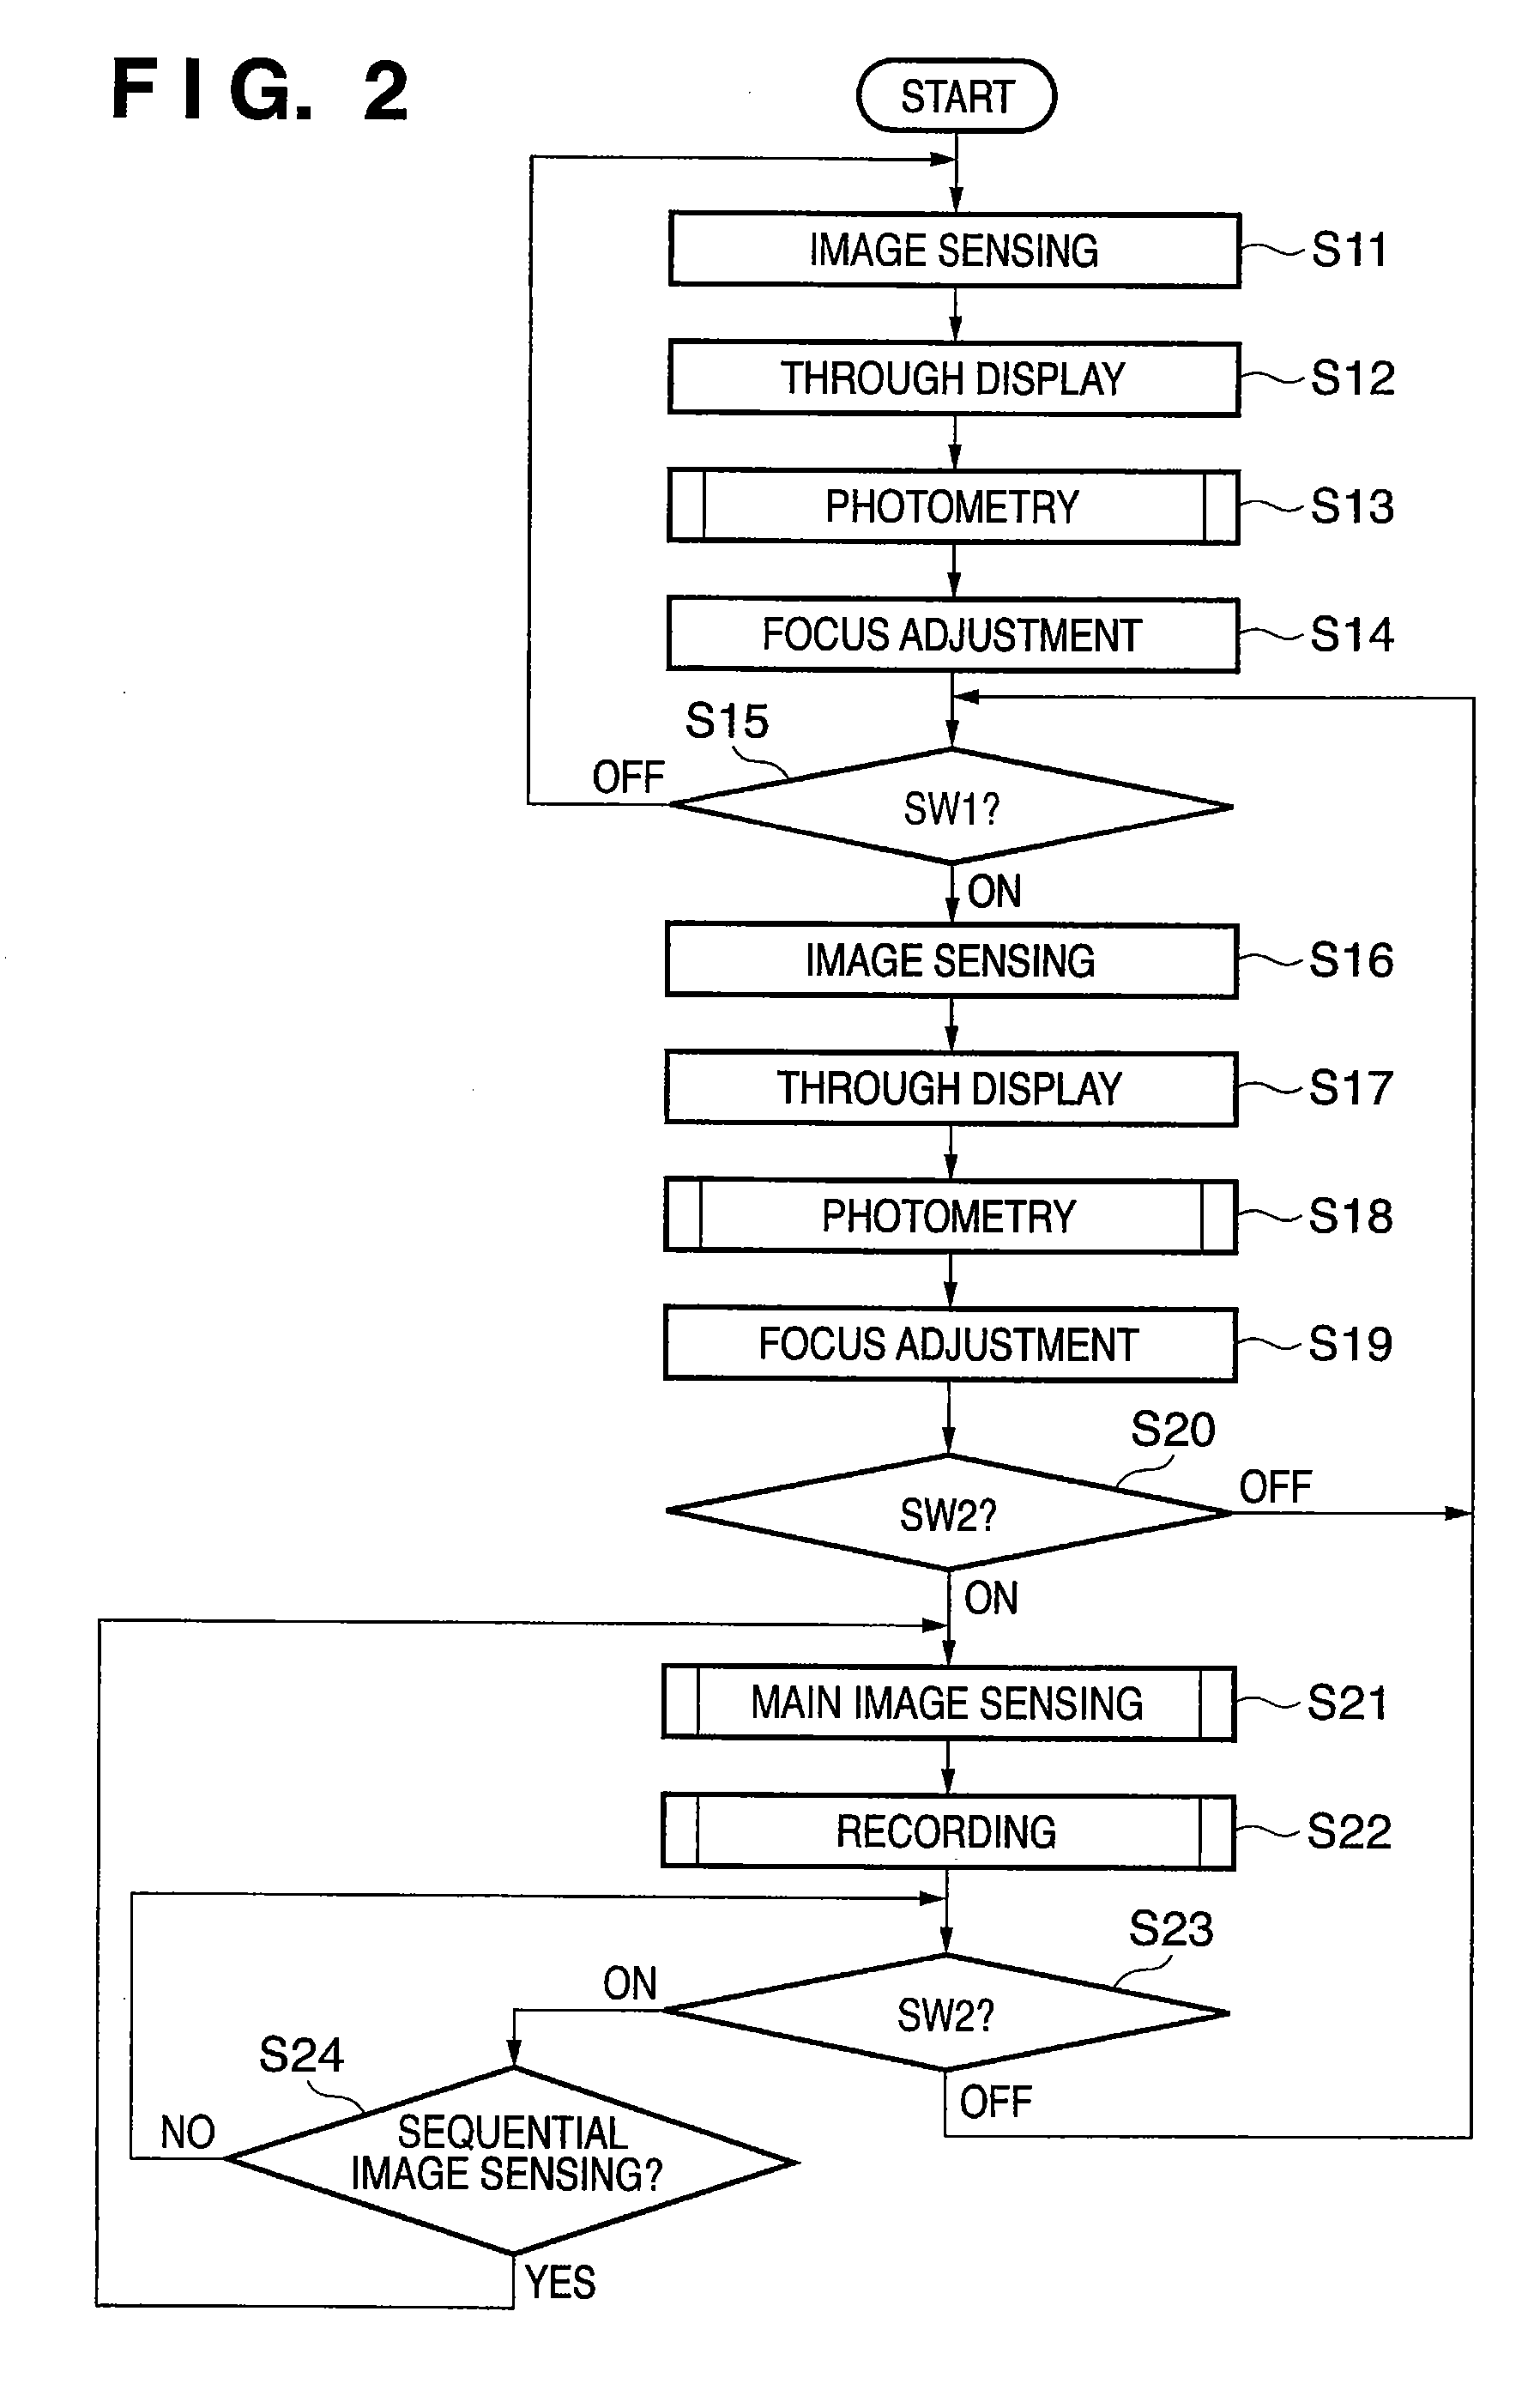 Image sensing apparatus having exposure control and method therefor